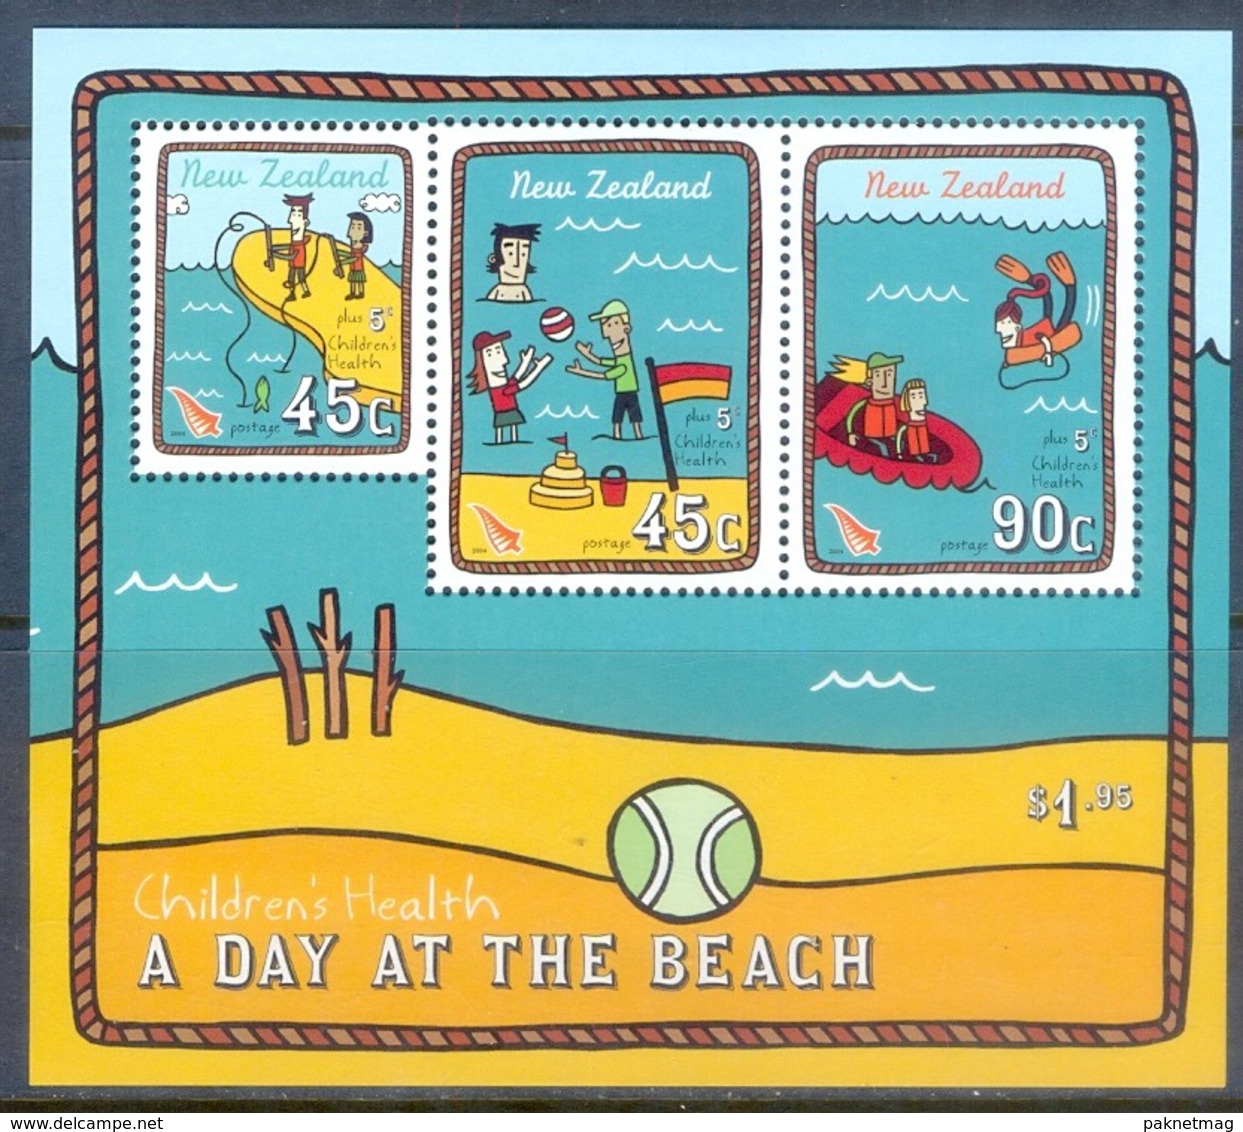 K102- New Zealand 2004 Children's Health - A Day At The Beach. Boat. Fish. - Unused Stamps